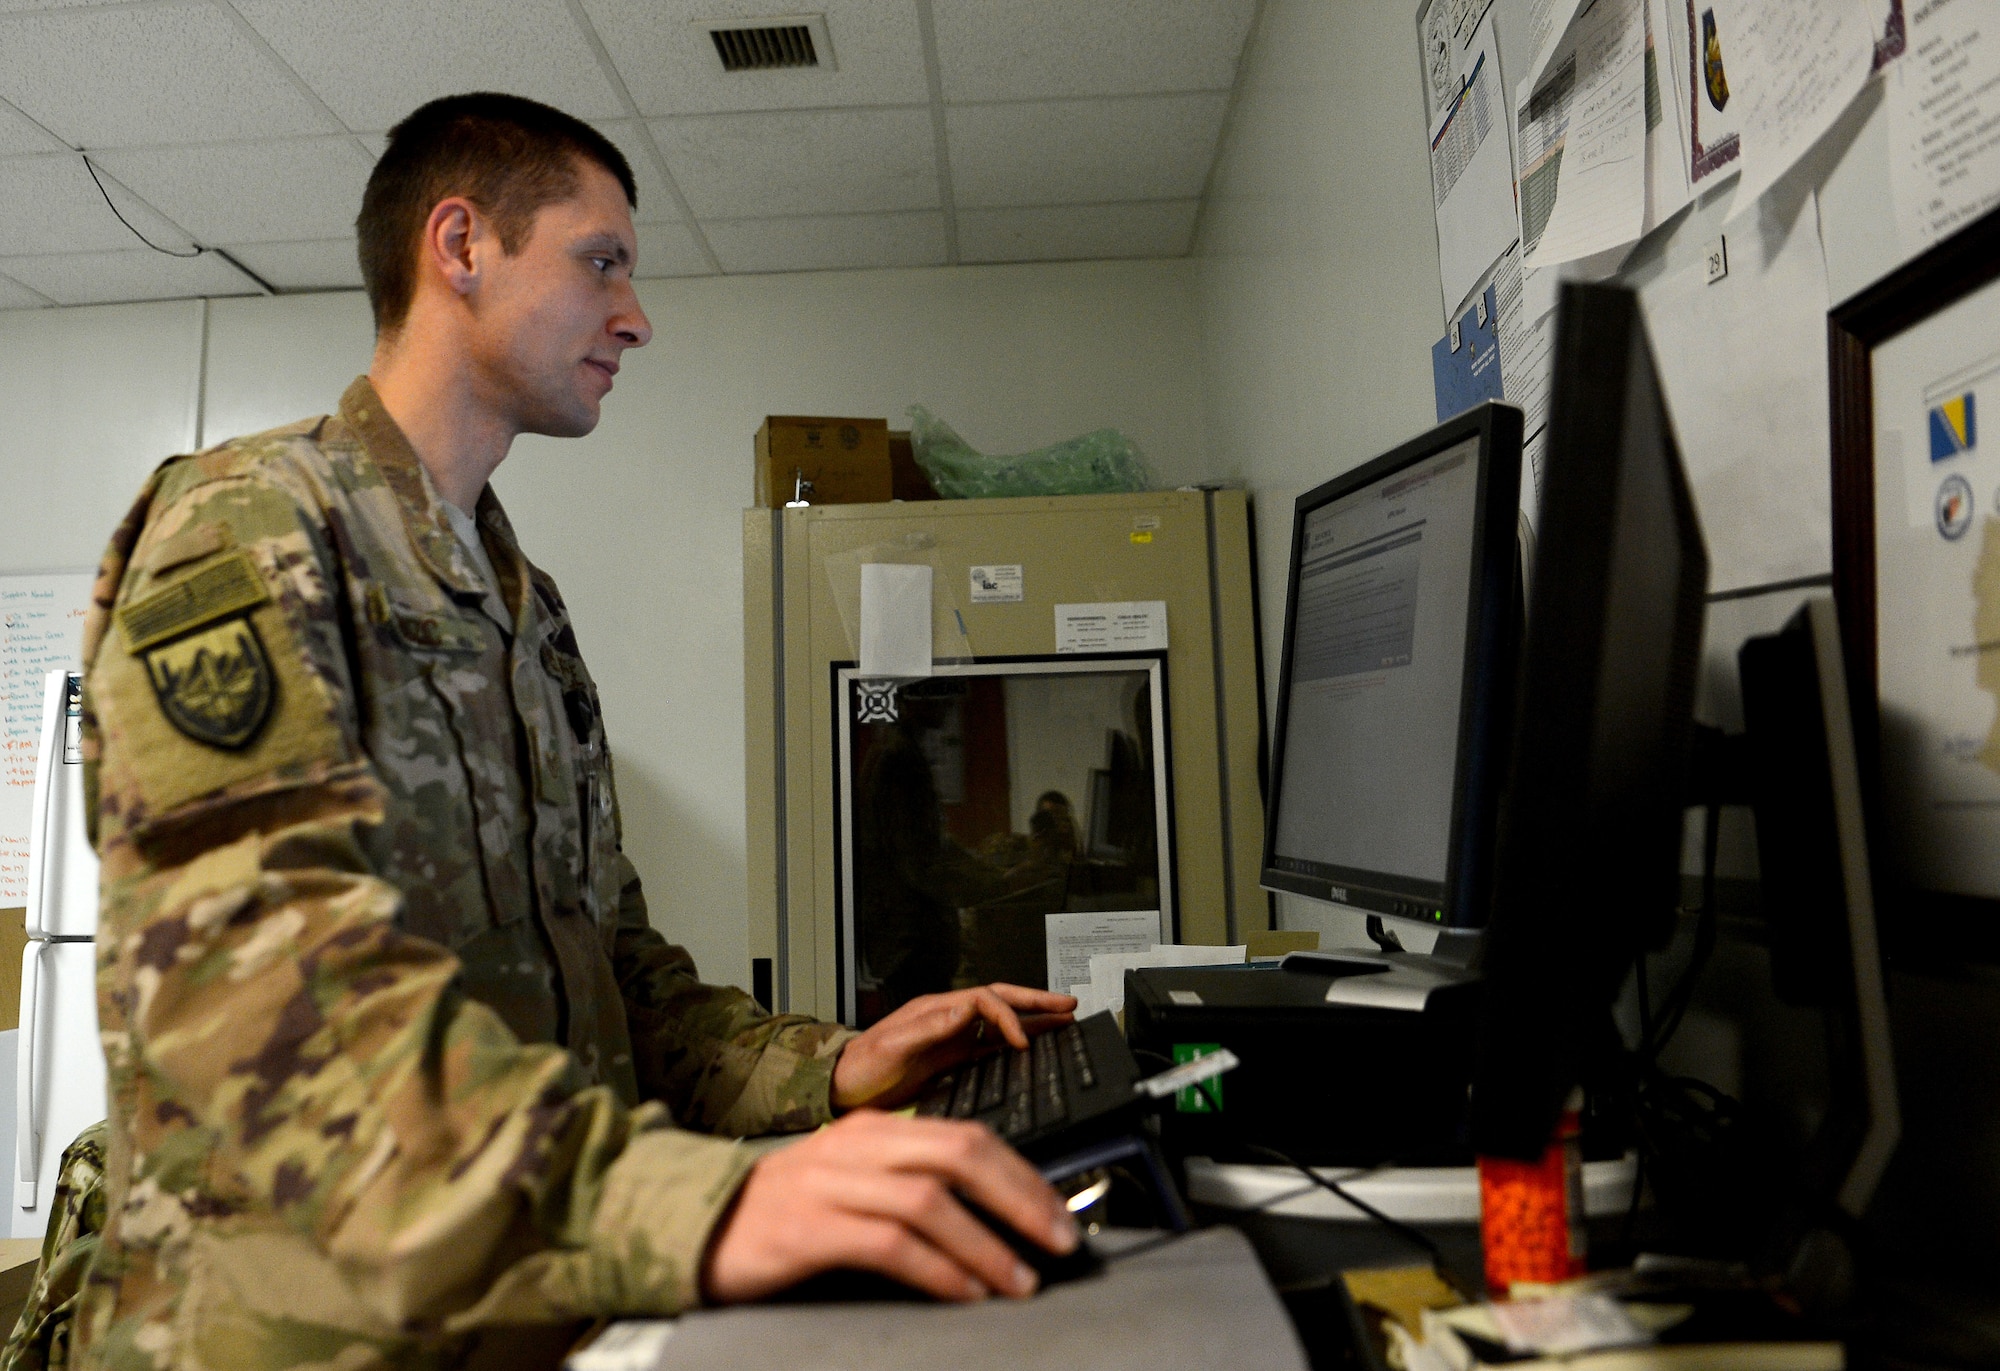 Staff Sgt. Nikola Bozic, 455th Expeditionary Medical Group public health technician, inputs data into his computer after conducting his routine food inspection of the Grady dining facility Feb. 15, 2018 at Bagram Airfield, Afghanistan.